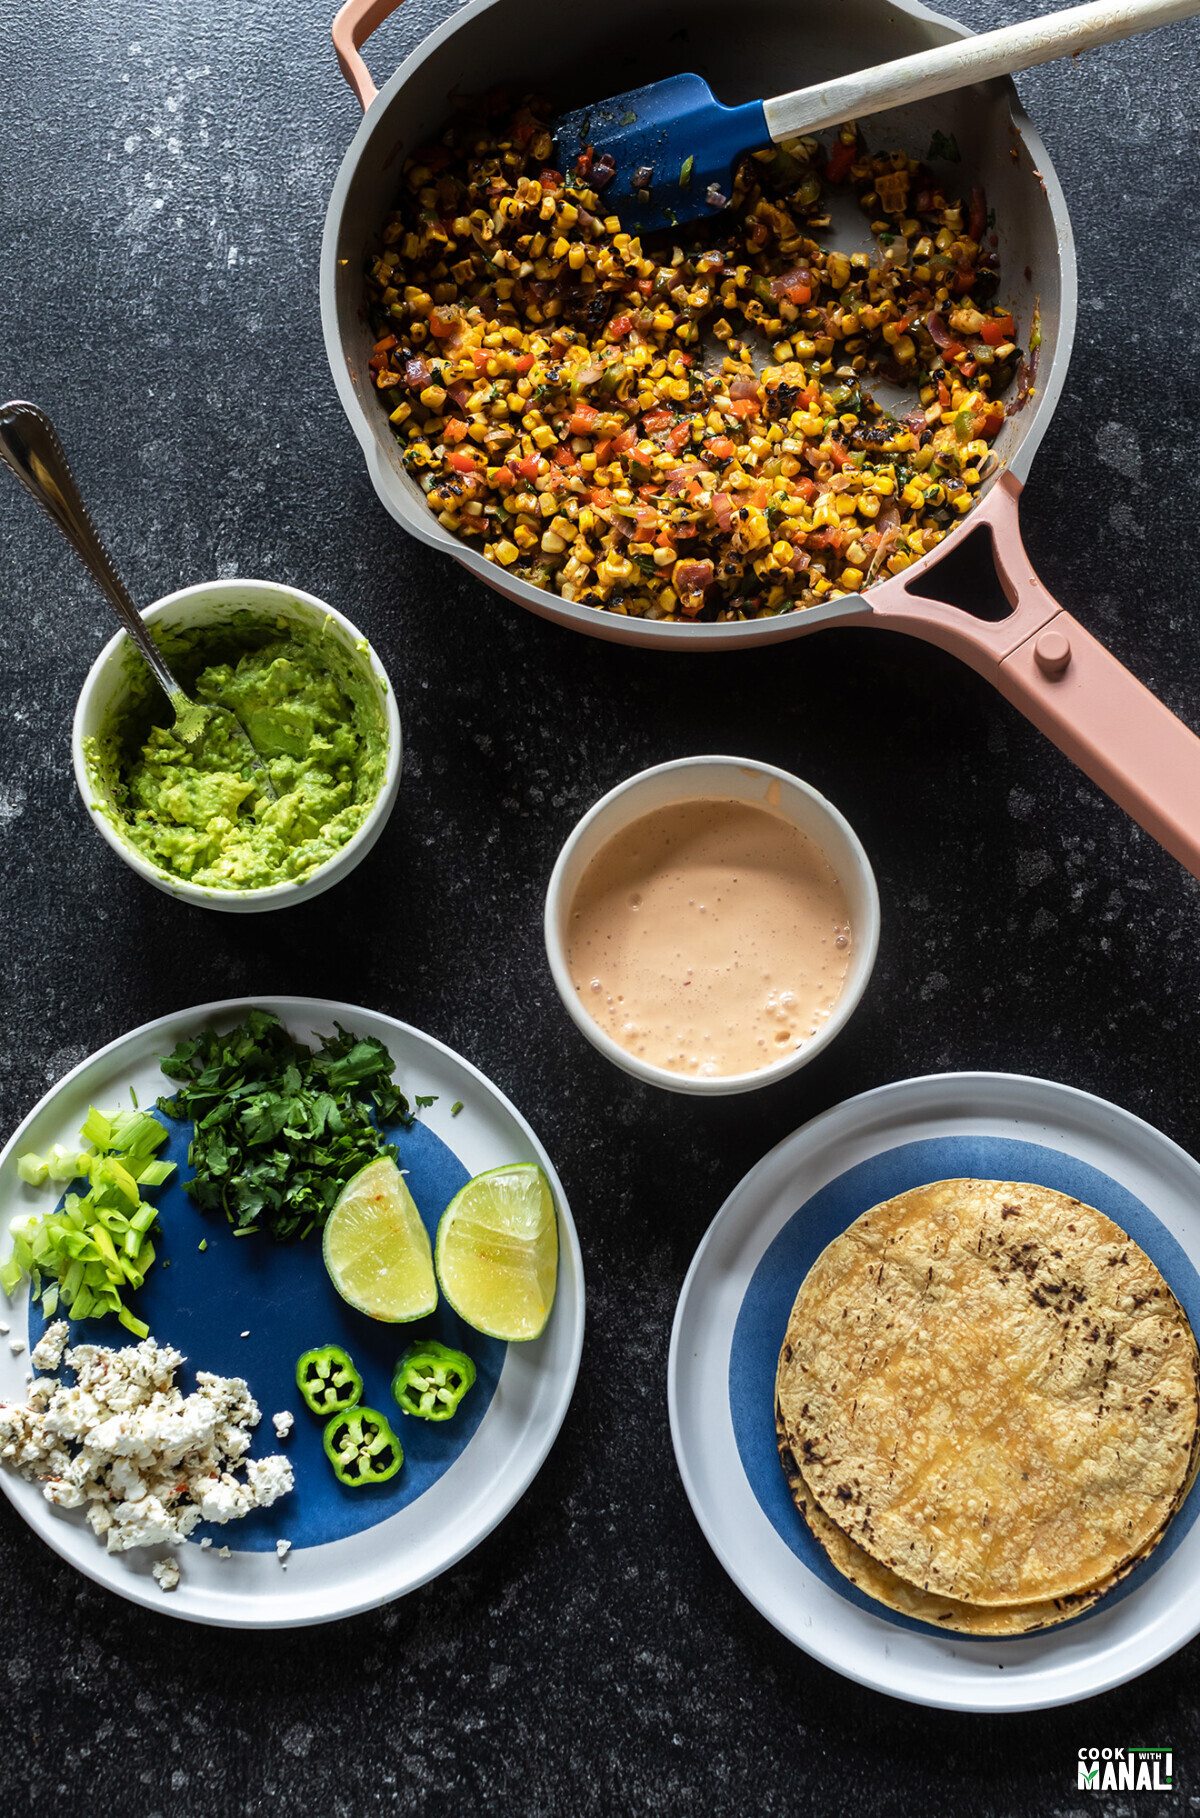 components for corn tacos arranged on a board